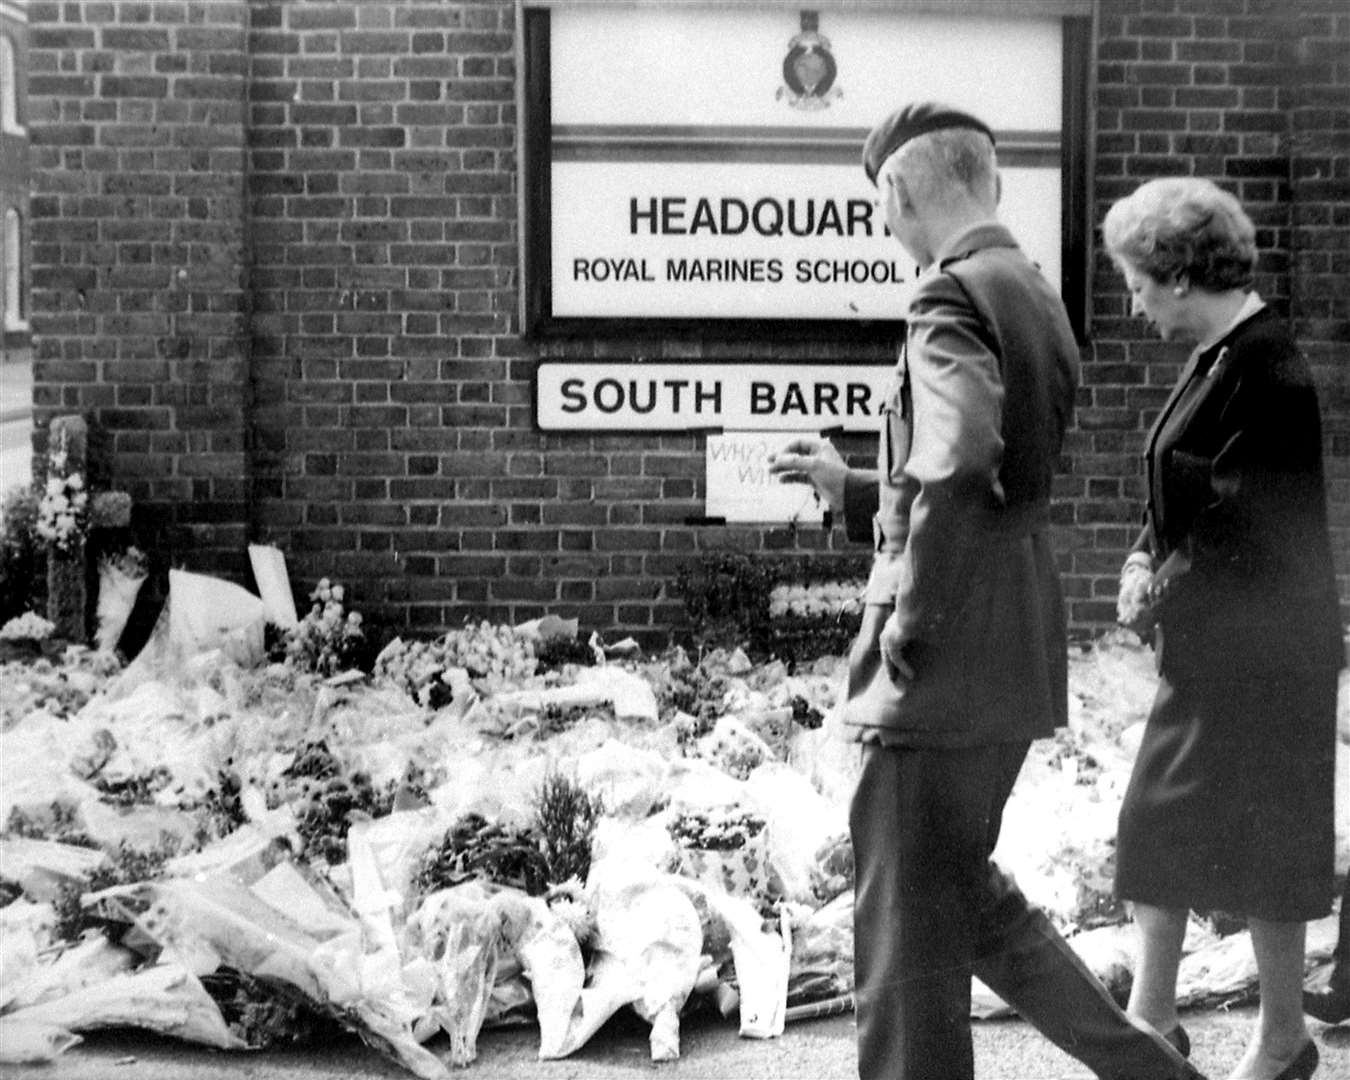 Margaret Thatcher visiting the floral tributes laid at south barracks gate in 1989